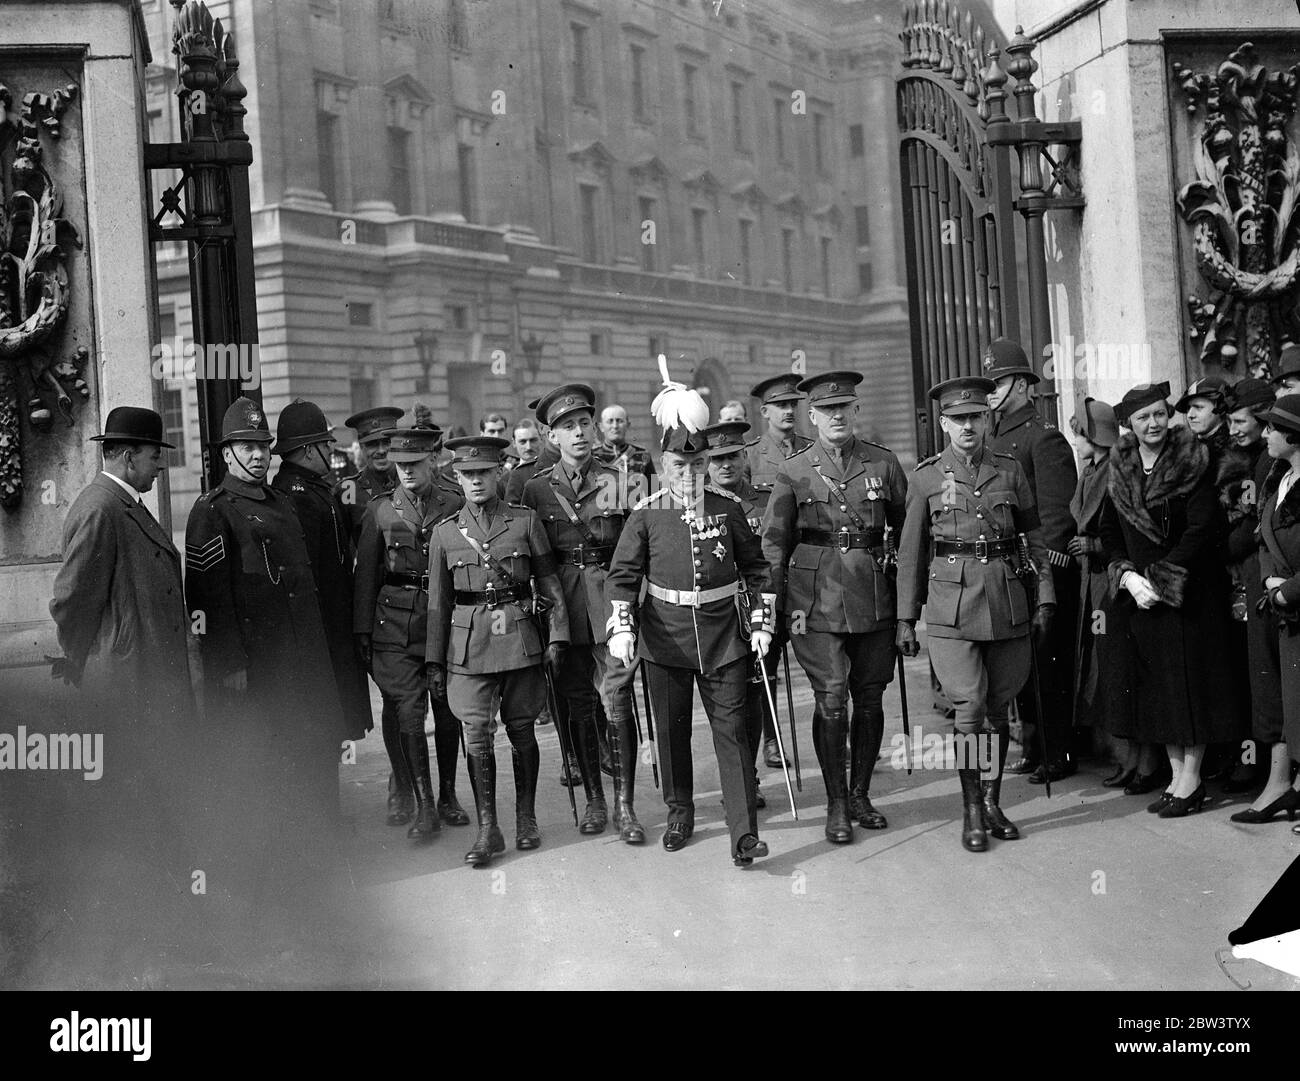 For only the third time in 50 years a Levee was held at Buckingham Palace . The levee council is meeting at St James Palace , the King decided to hold the Levee at Buckingham Palace instead . Photo shows , Col Sir A Holbrook and officers of 44 DIV R A S C . 18 March 1936 Stock Photo